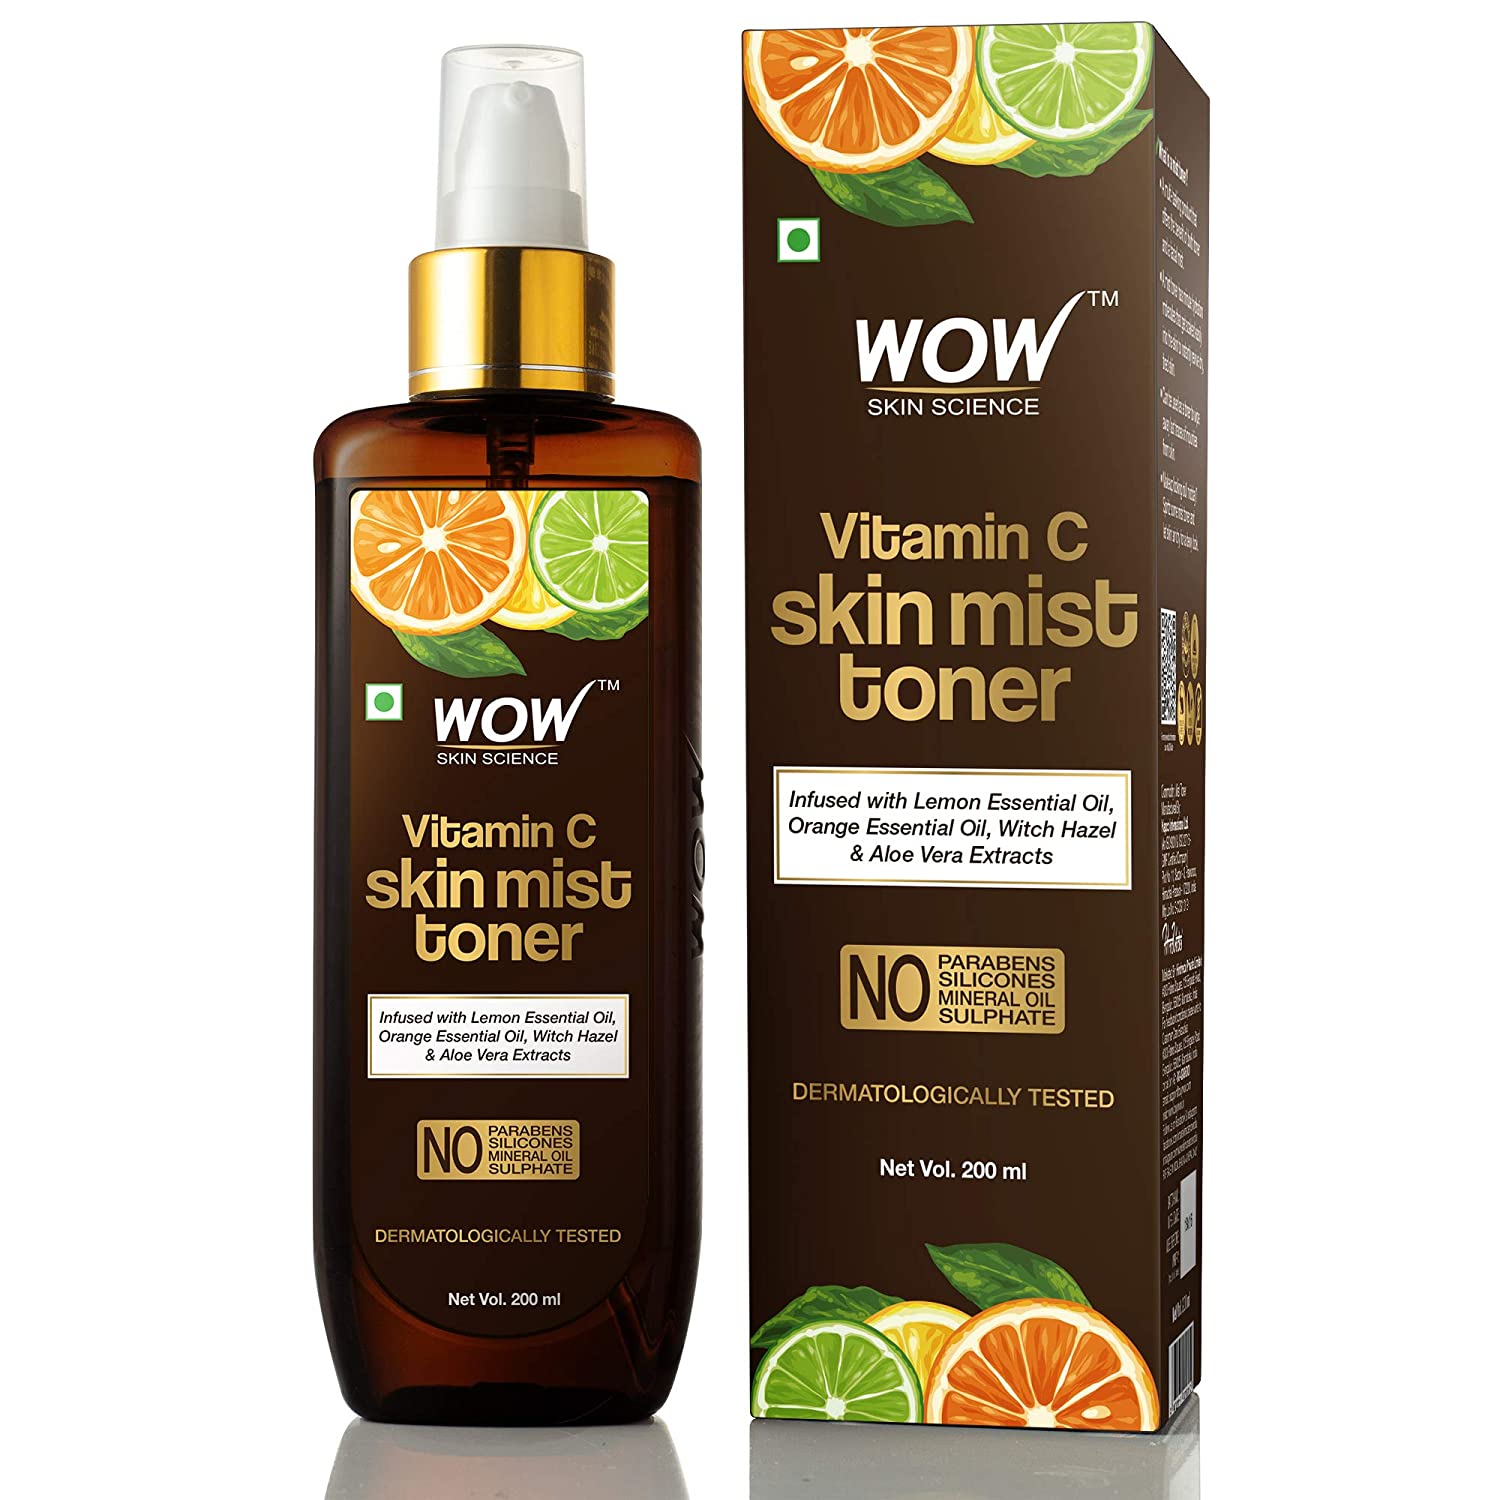 wow-skin-science-face-toner